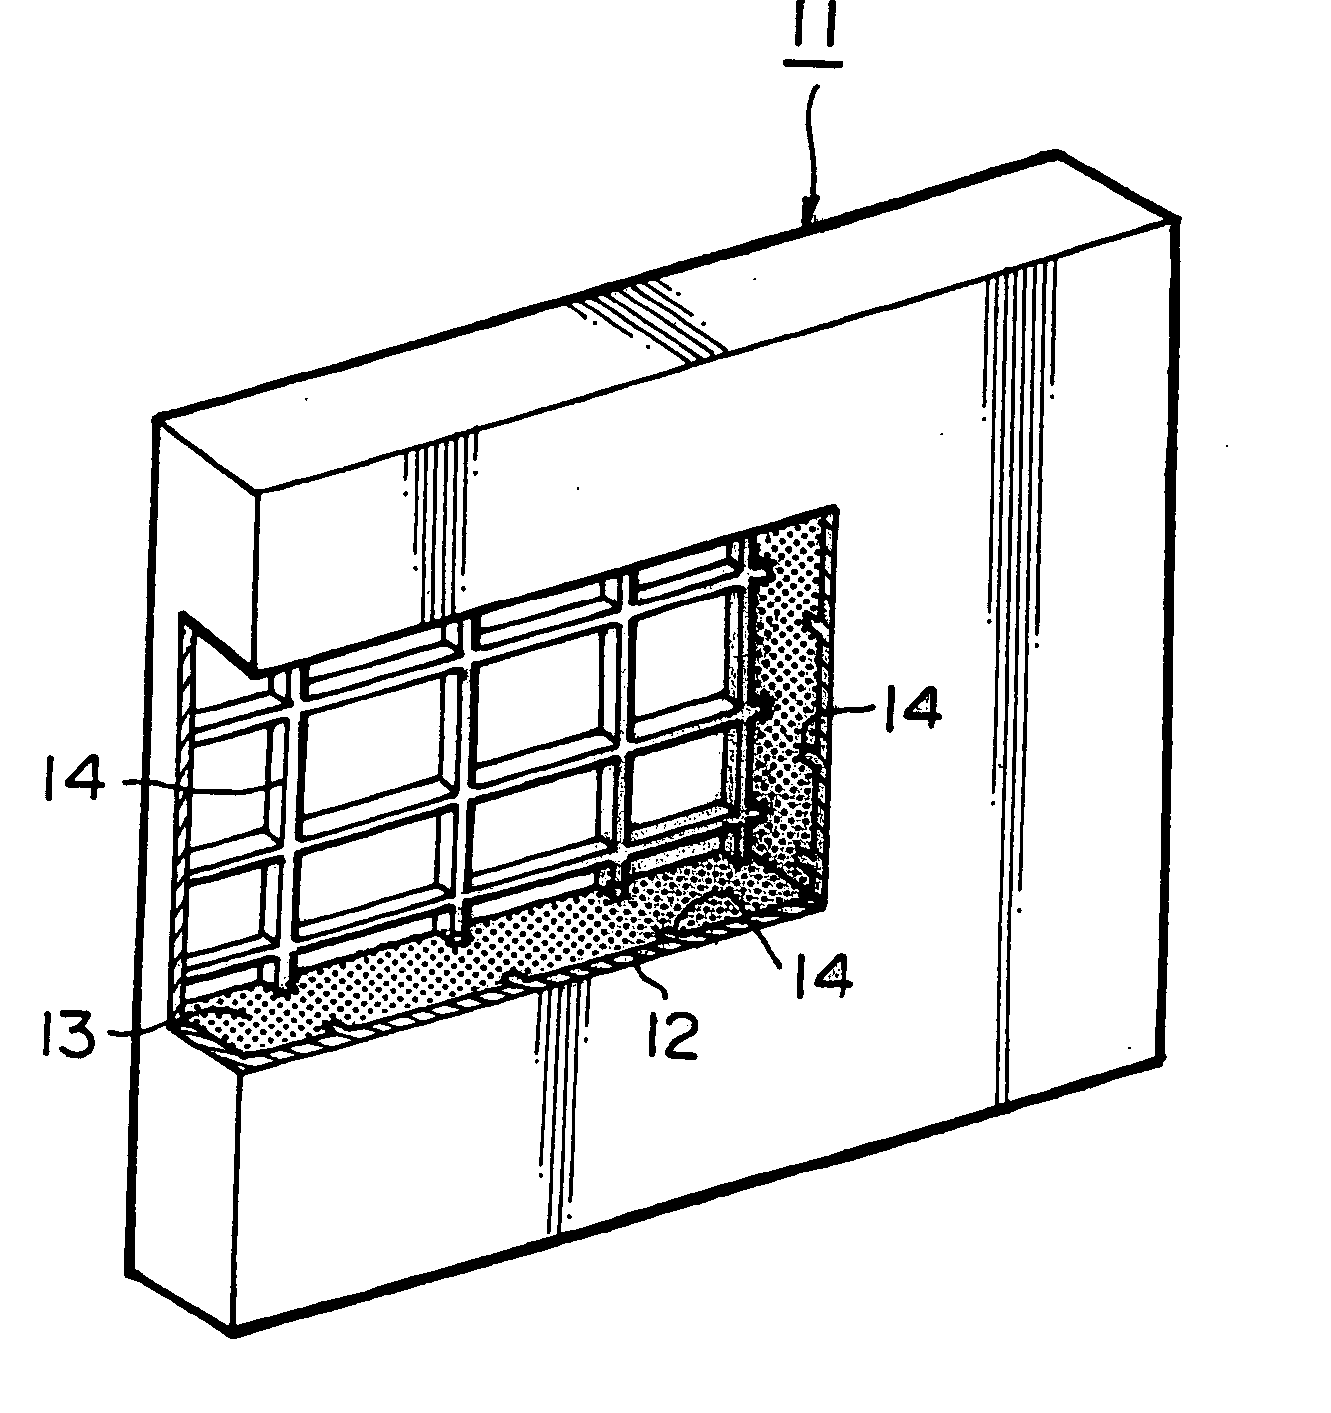 Sound-proof wall made of frp, and method of producing the same